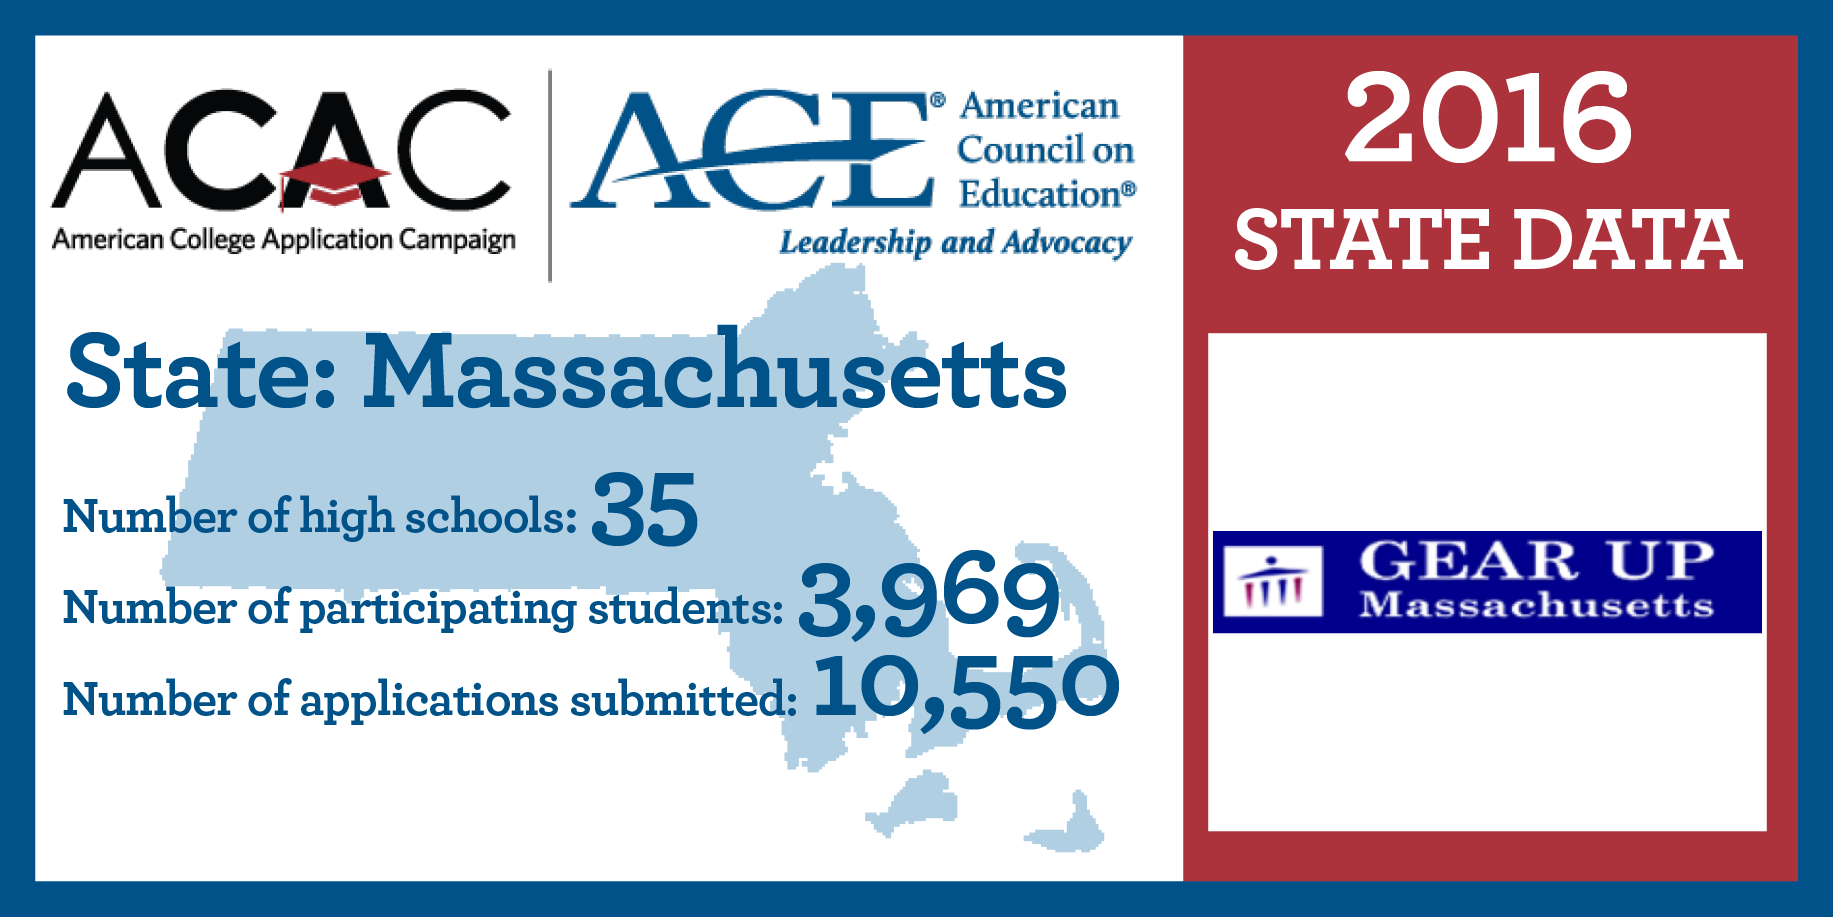 2016 Data | State:Massachusetts | Number of high schools: 45 | Number of participating students: 3,969 | Number of applications submitted: 10,550